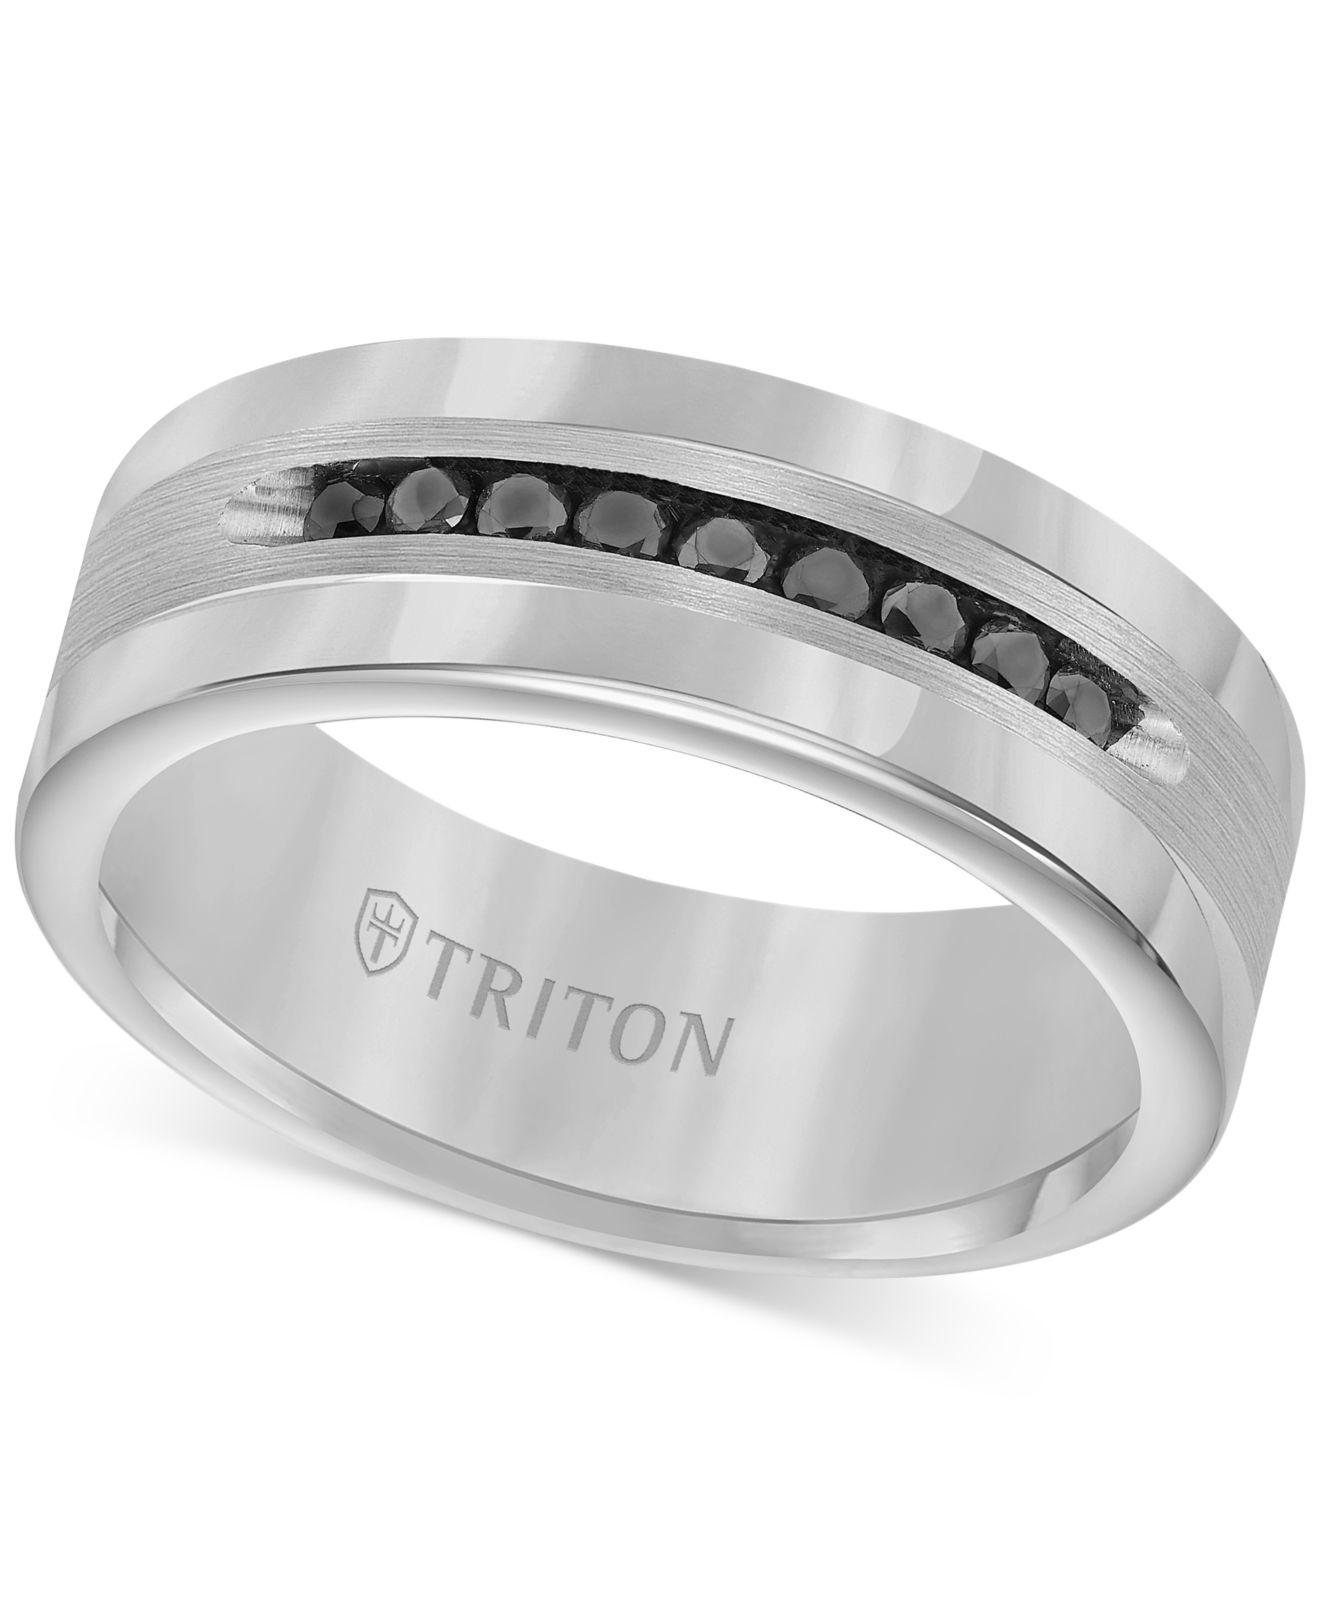 Triton Men's Tungsten And Sterling Silver Ring, Channel